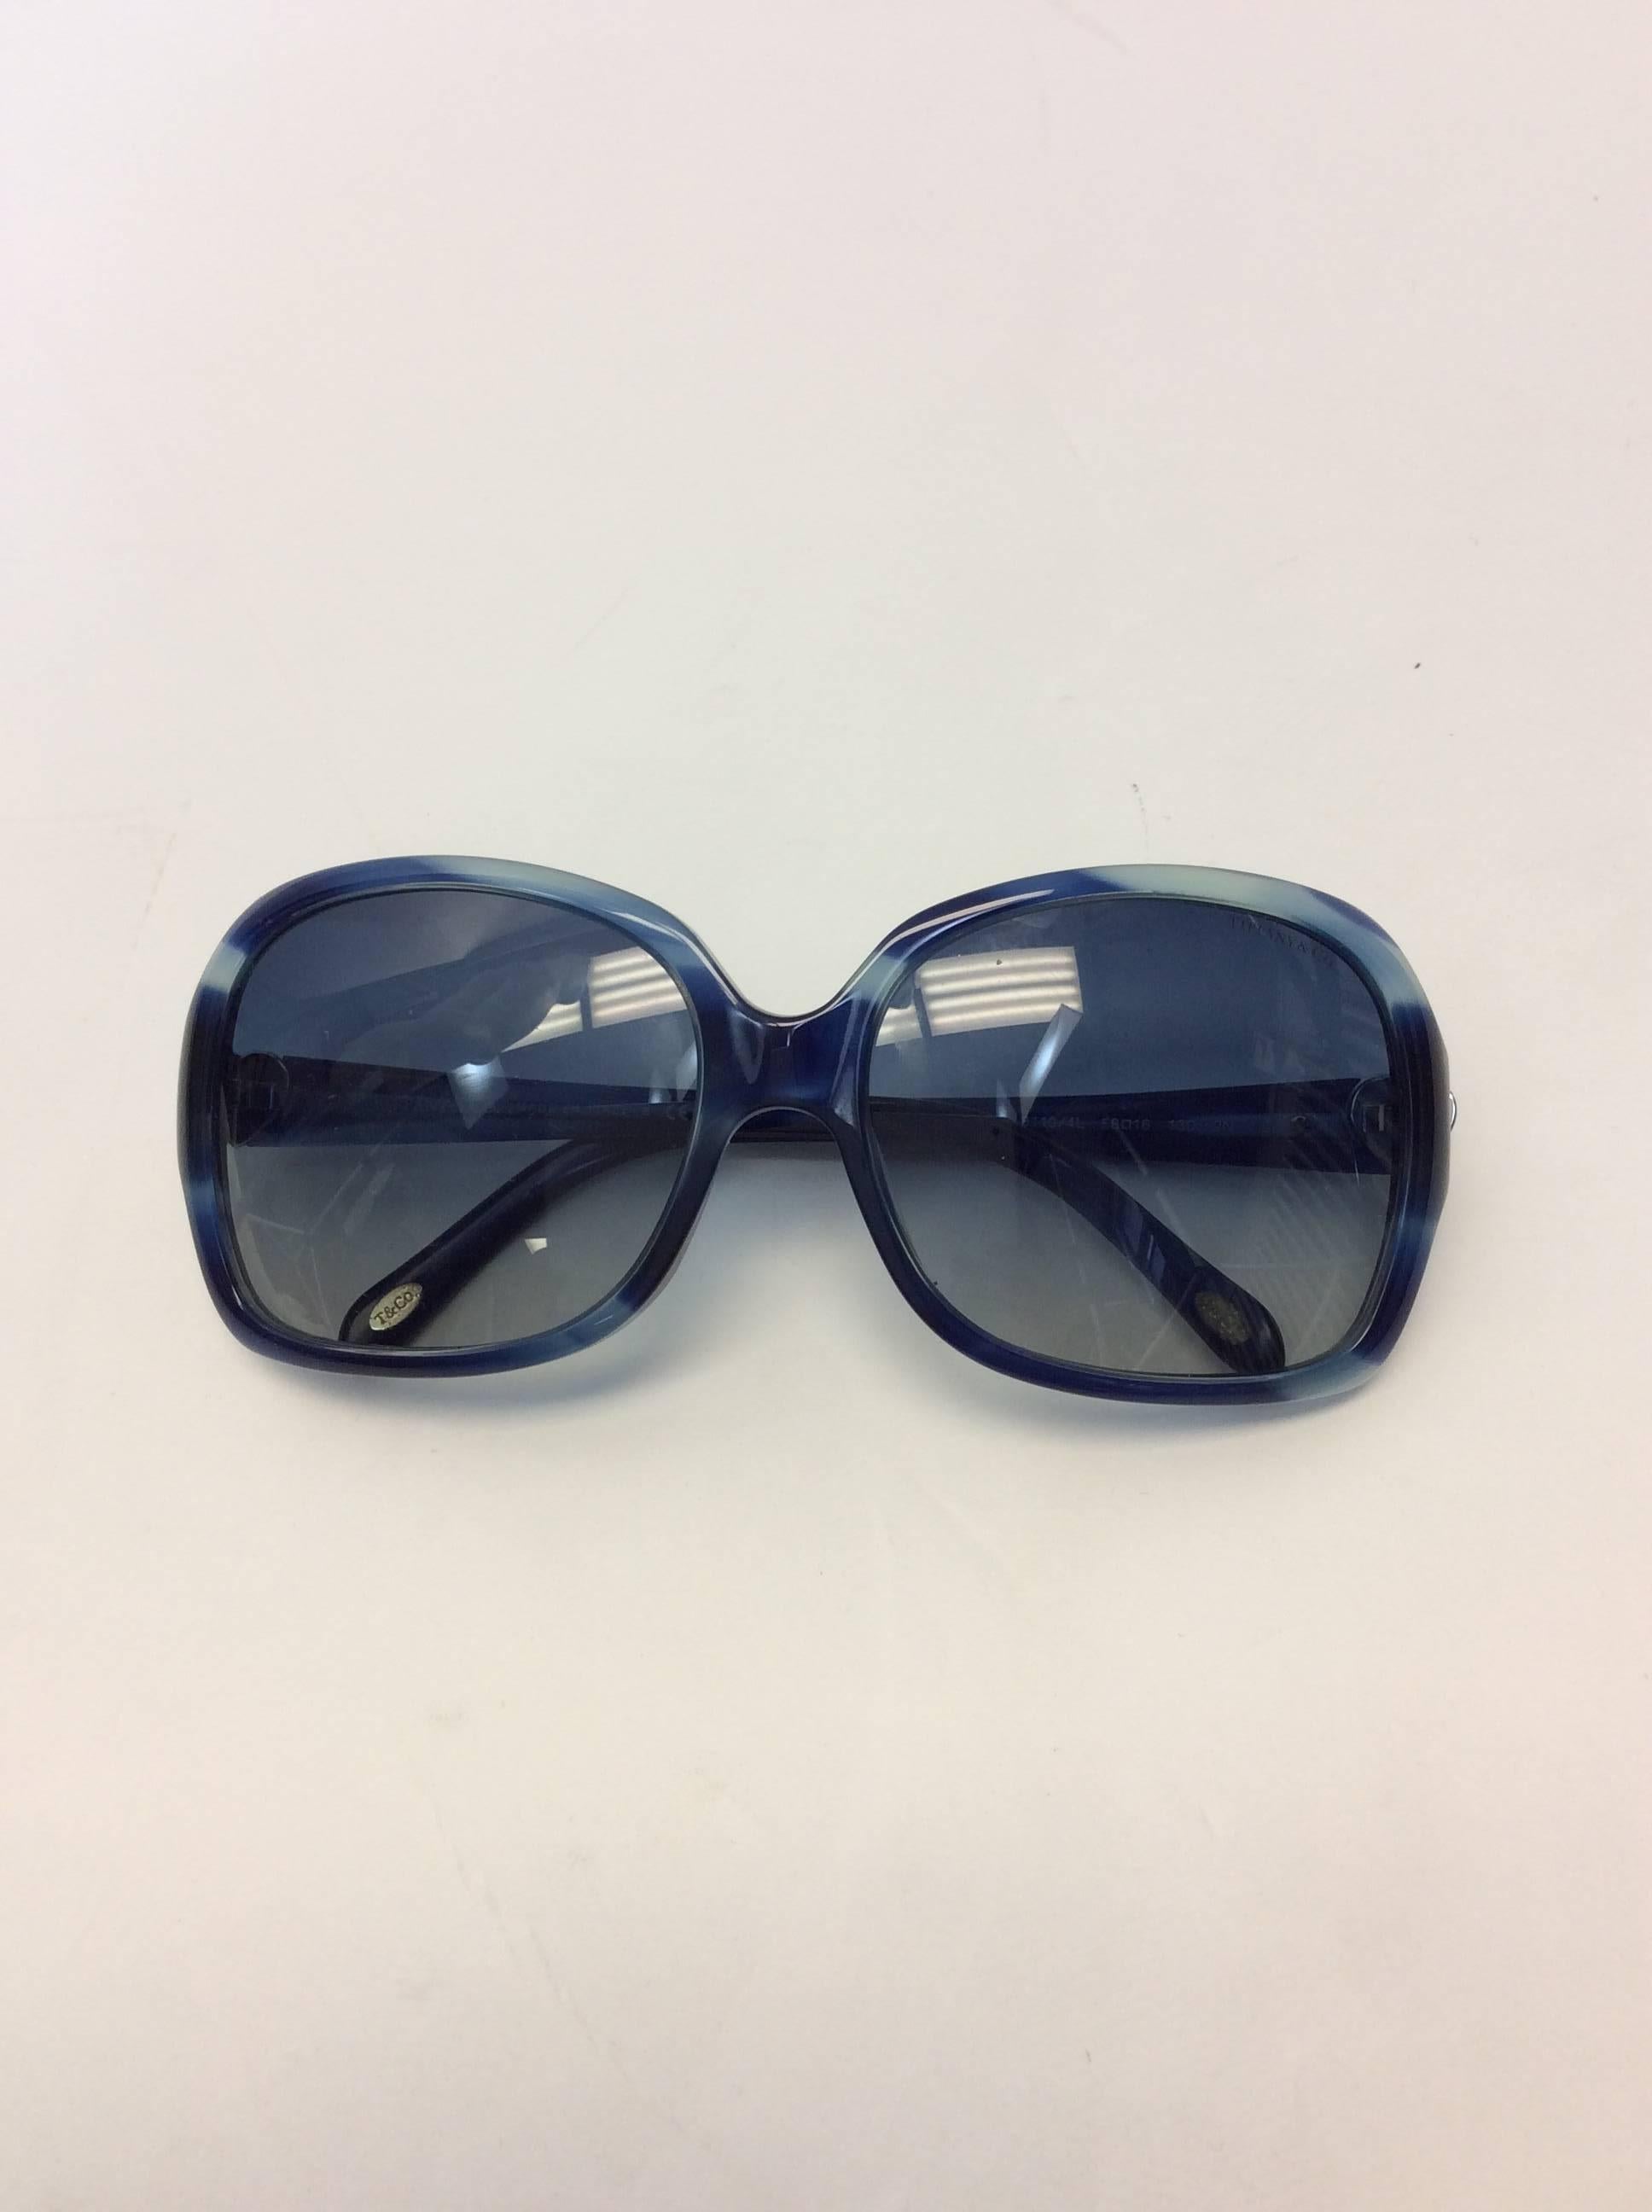 Tiffany & Co Blue Tortoise Sunglasses
Tortoise style 
Signature Tiffany's silver heart at temple
Box and case included
